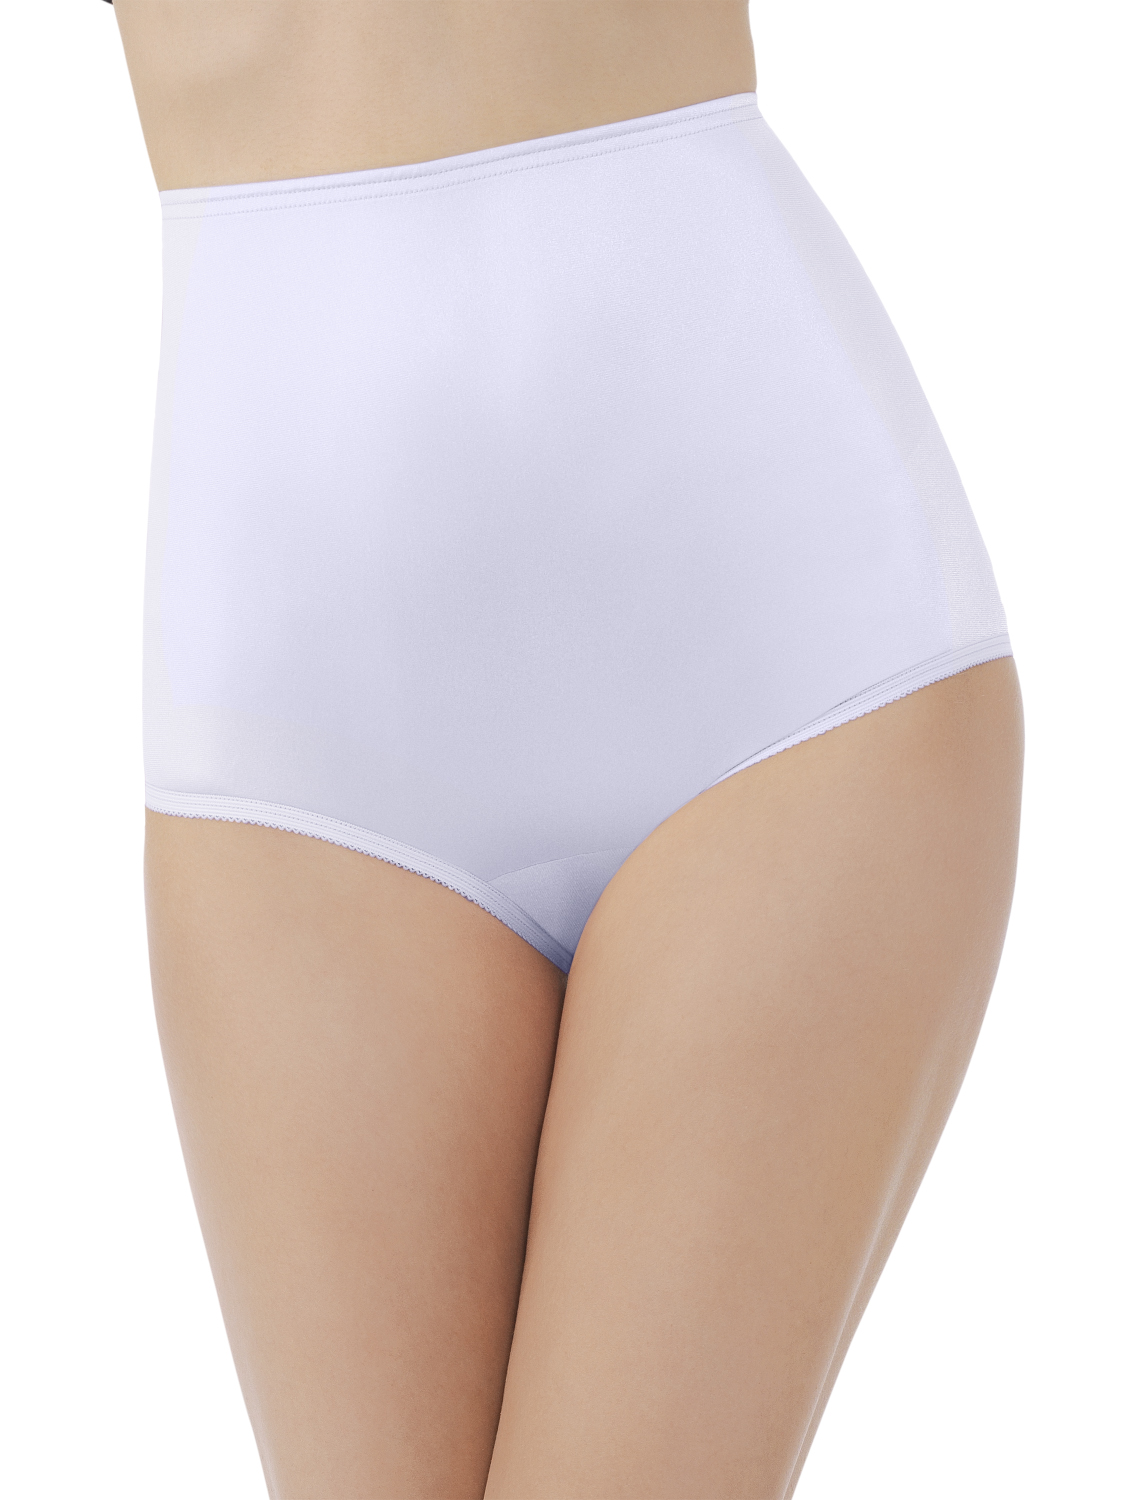 Vanity Fair 9 2xl 15712 Star White Perfectly Yours RAVISSANT Tailored Brief  for sale online